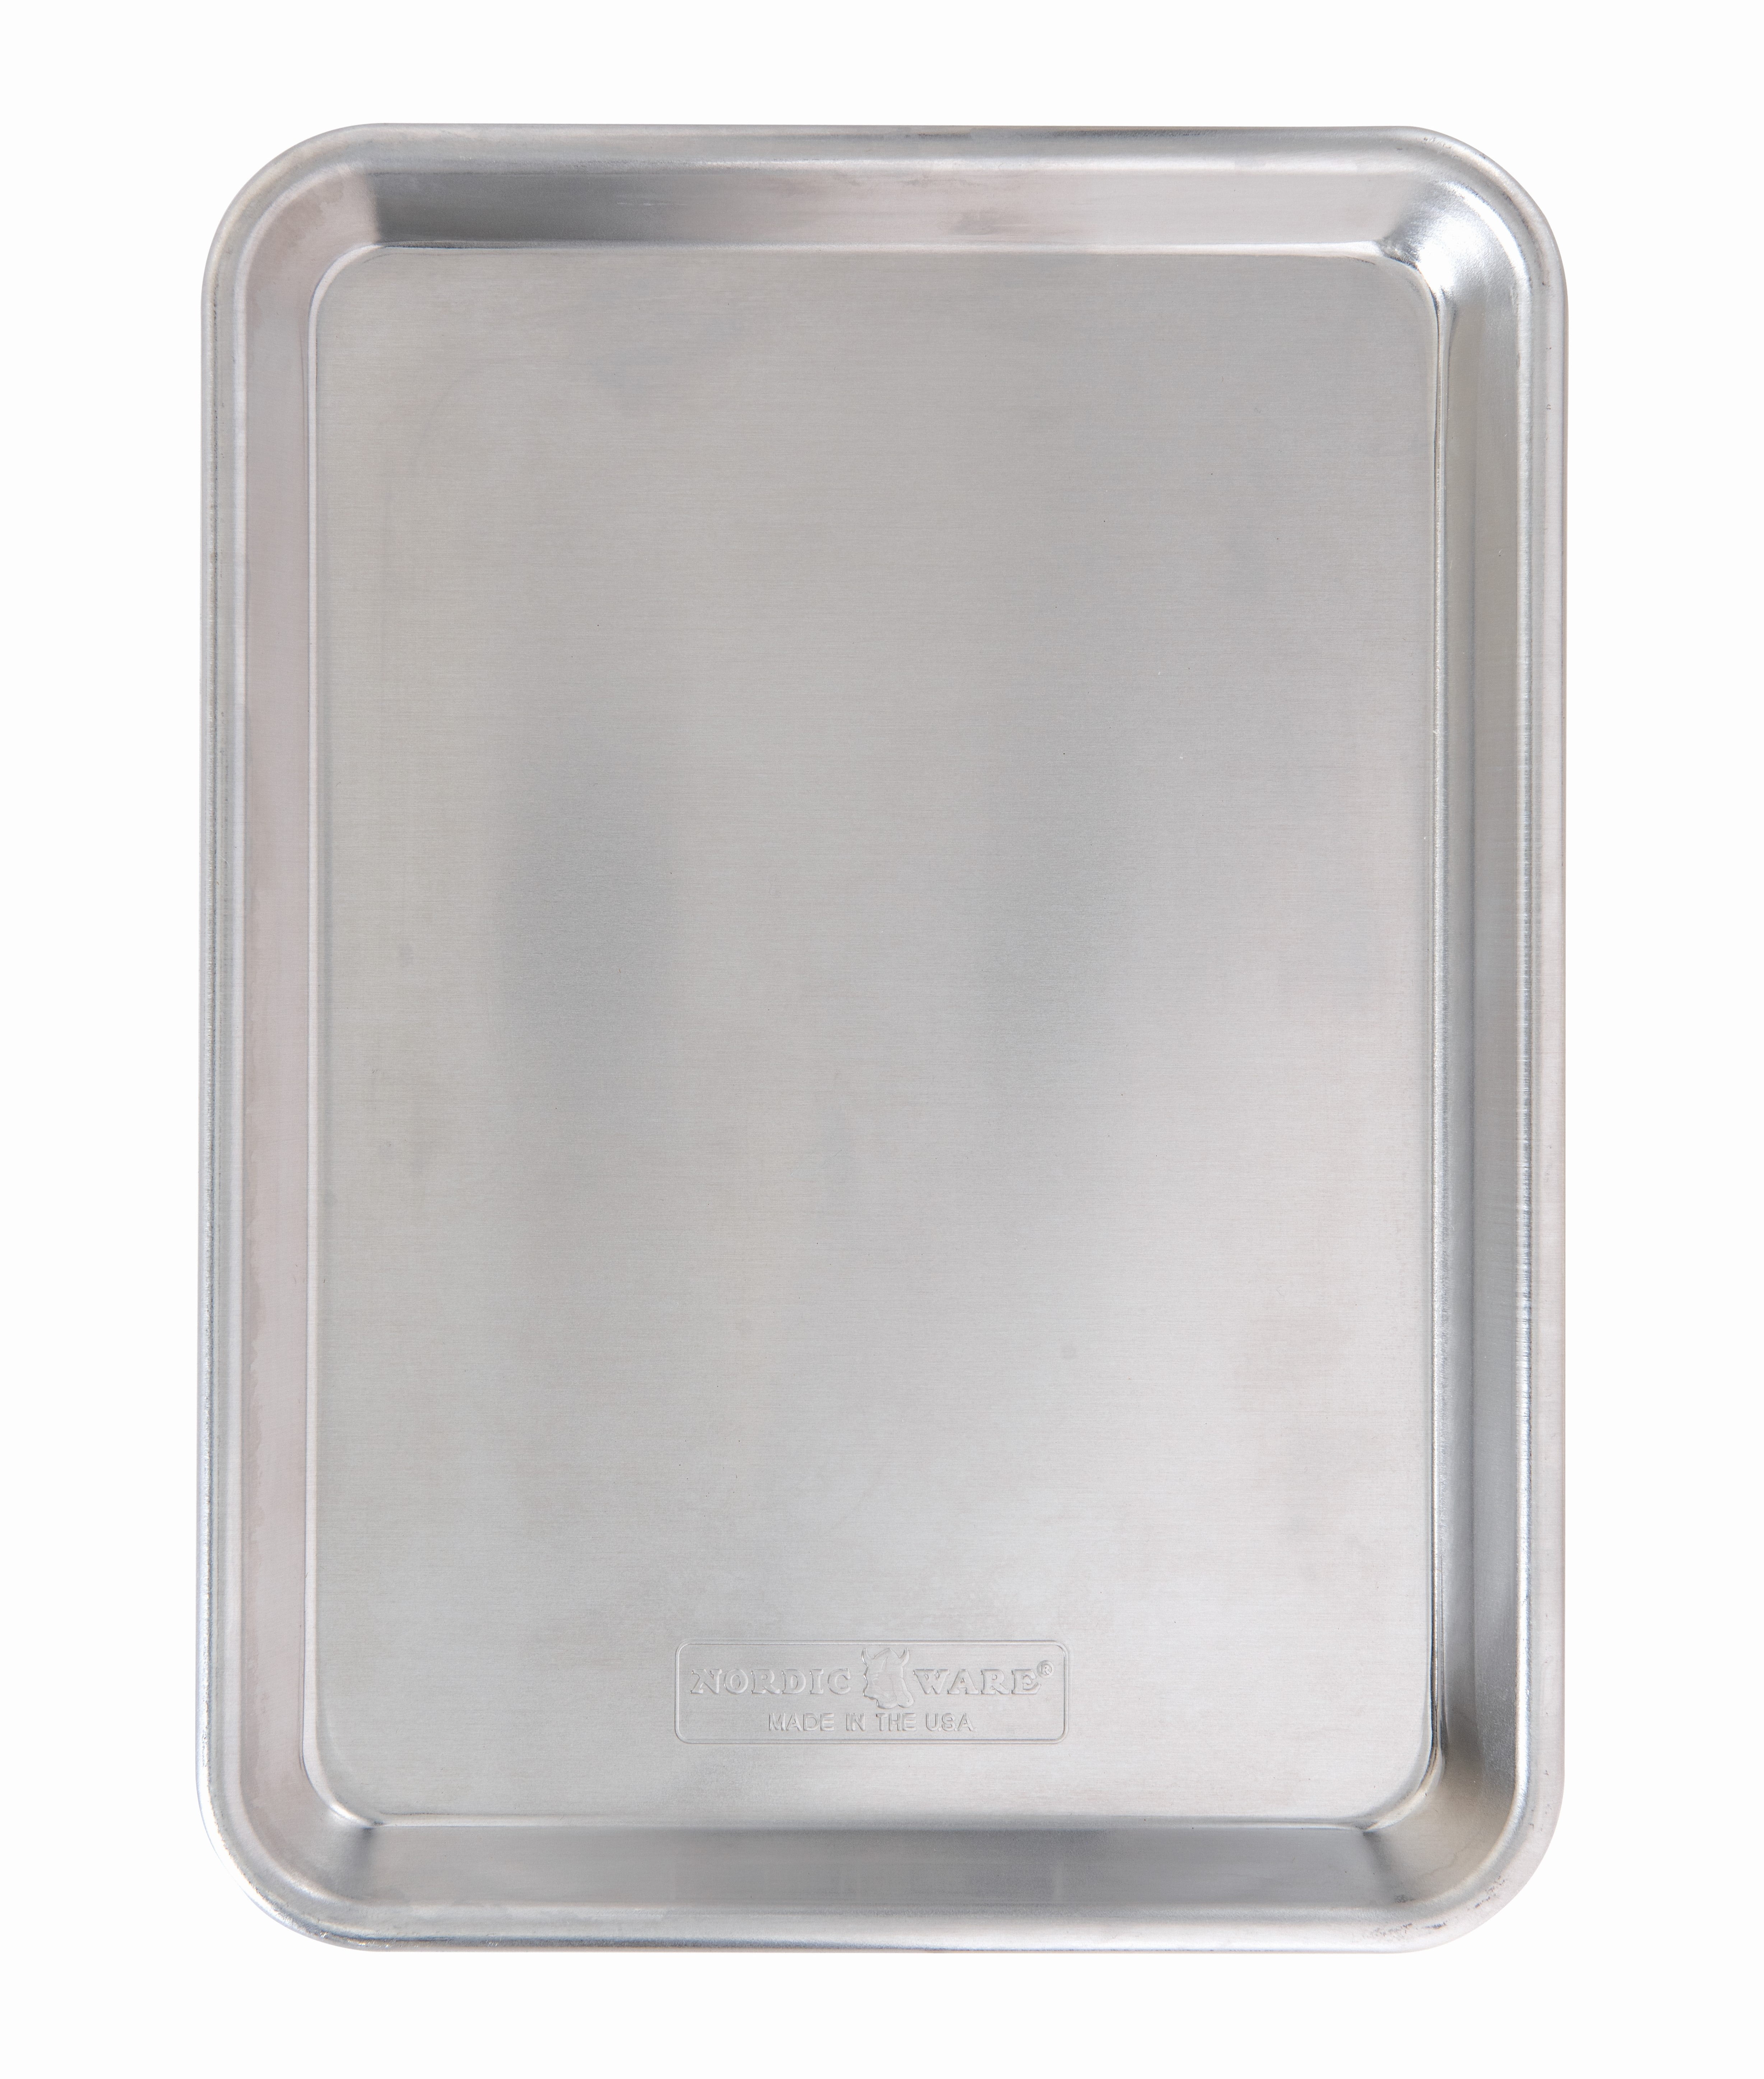 Commercial Quality Aluminum Steel Vegetables And Cakes Half Sheet Baking Pan 